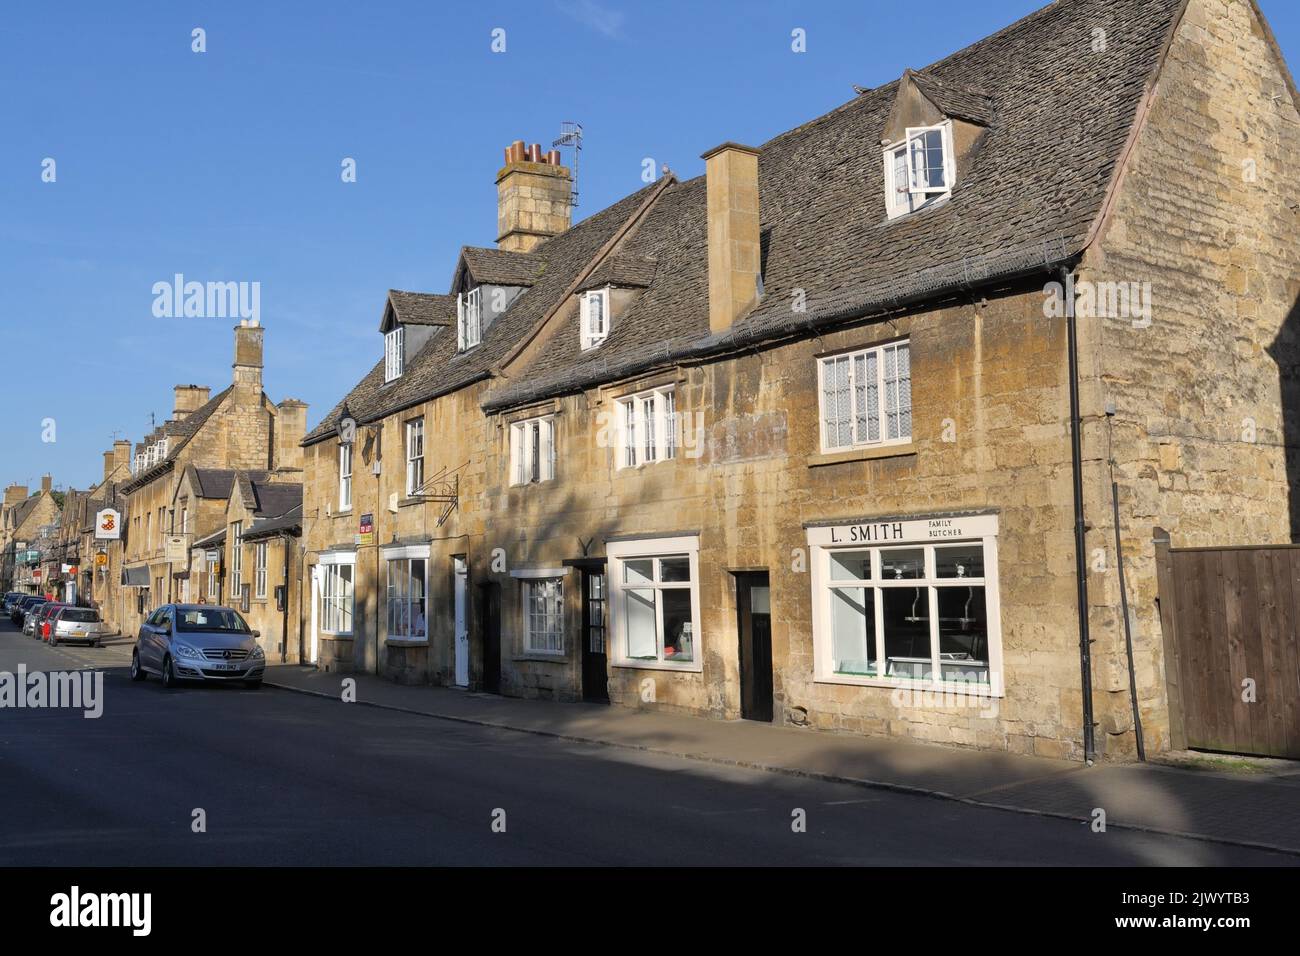 High street Butchers shop in rural Chipping Campden in the Cotswolds, Gloucestershire, England UK, English country town street view Stock Photo